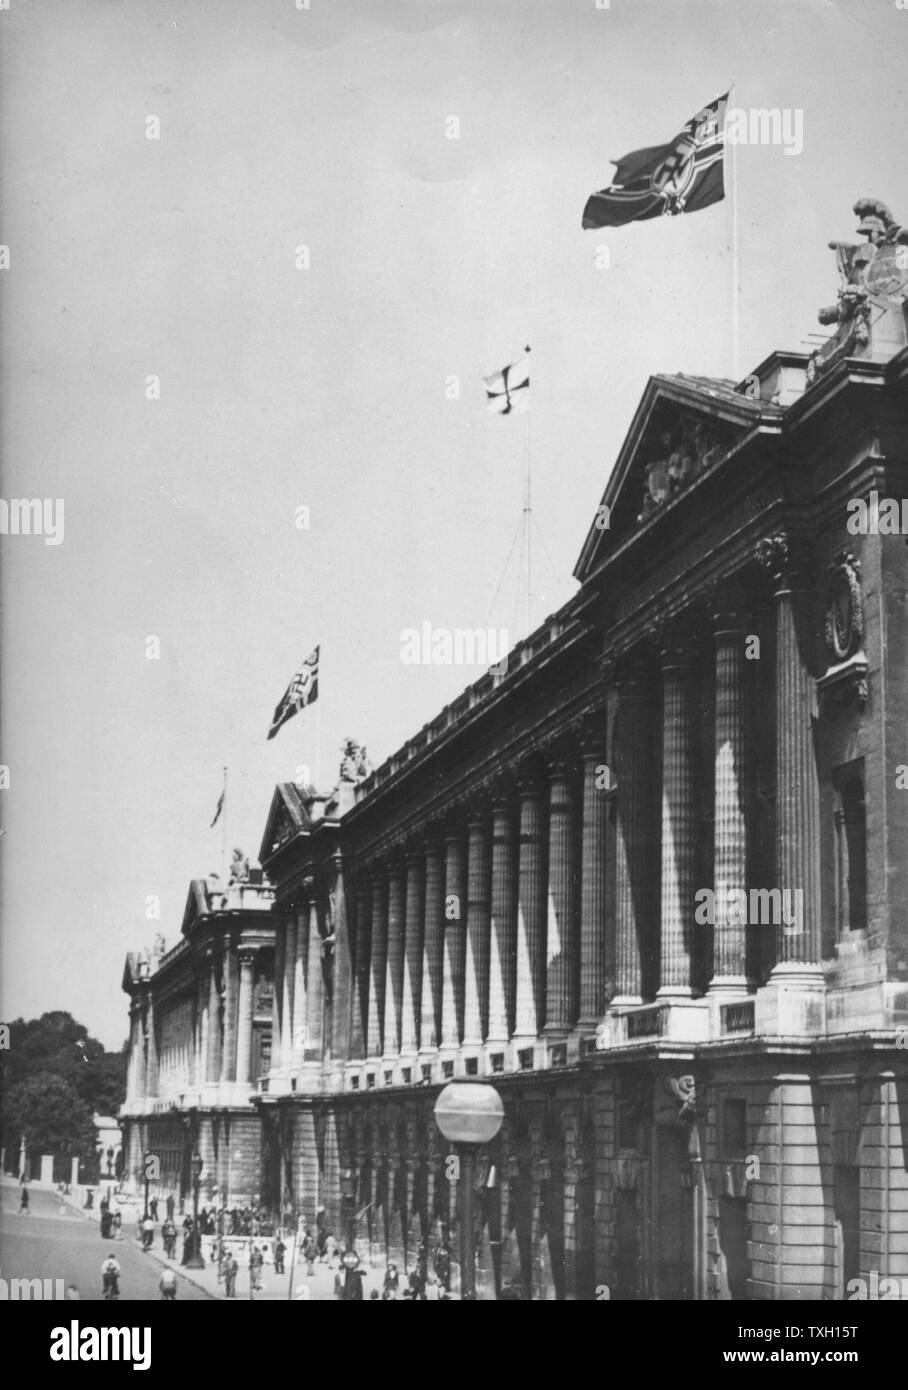 World War II: Occupation of Paris by German invaders. The Nazi flag flying over the Ministry of the Marine building, Place de la Concorde, July 1940 Stock Photo